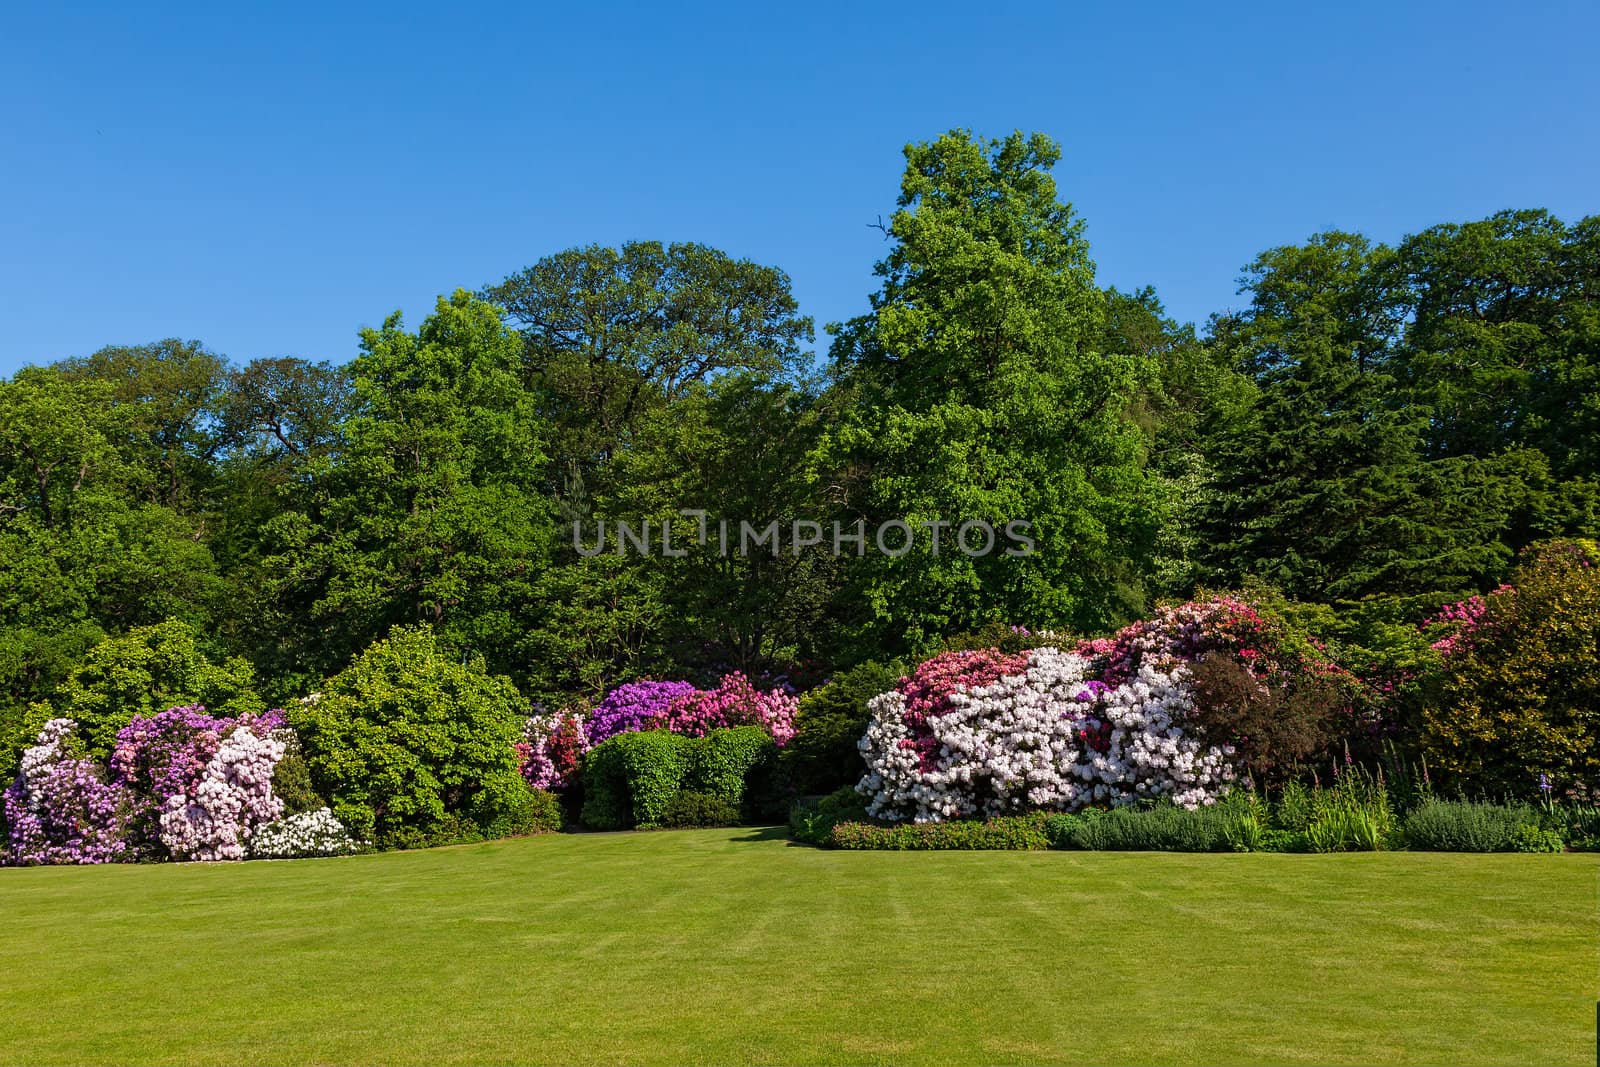 Rhododendron Azalea Bushes and Trees in Beautiful Summer Garden in the Sunshine